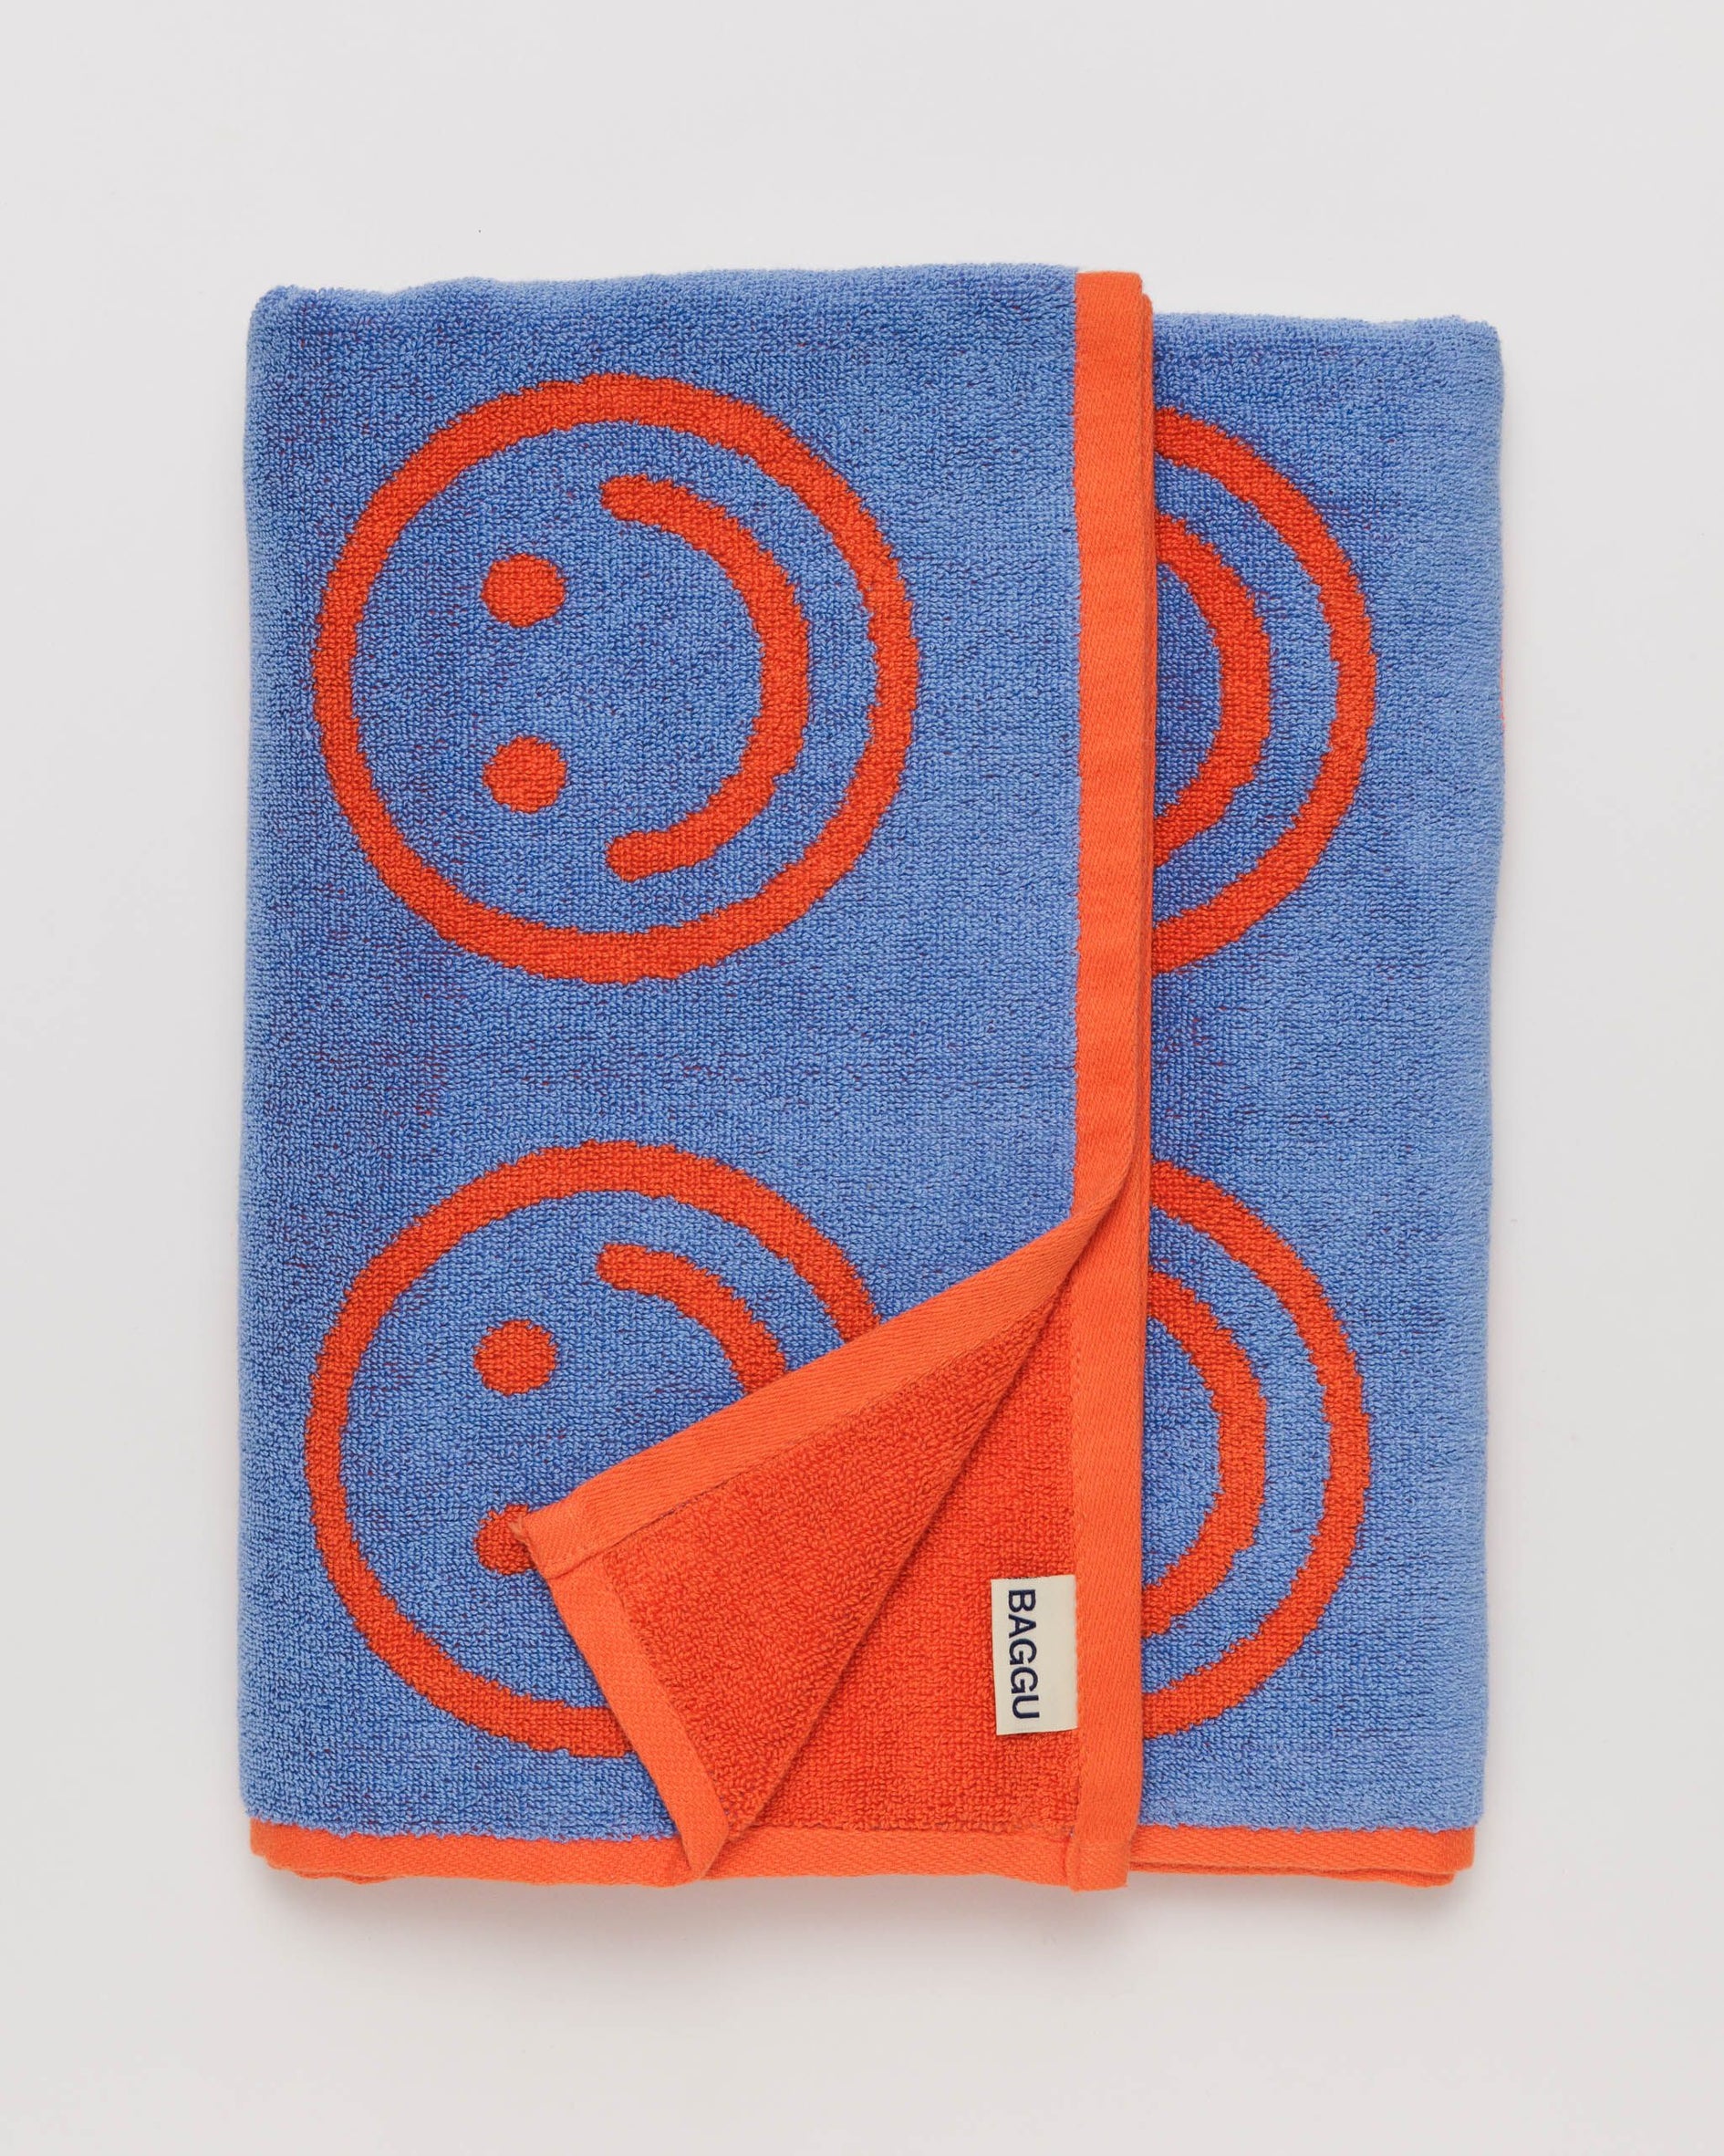 Square Towel with Hanging Loop - Blue - The Foundry Home Goods